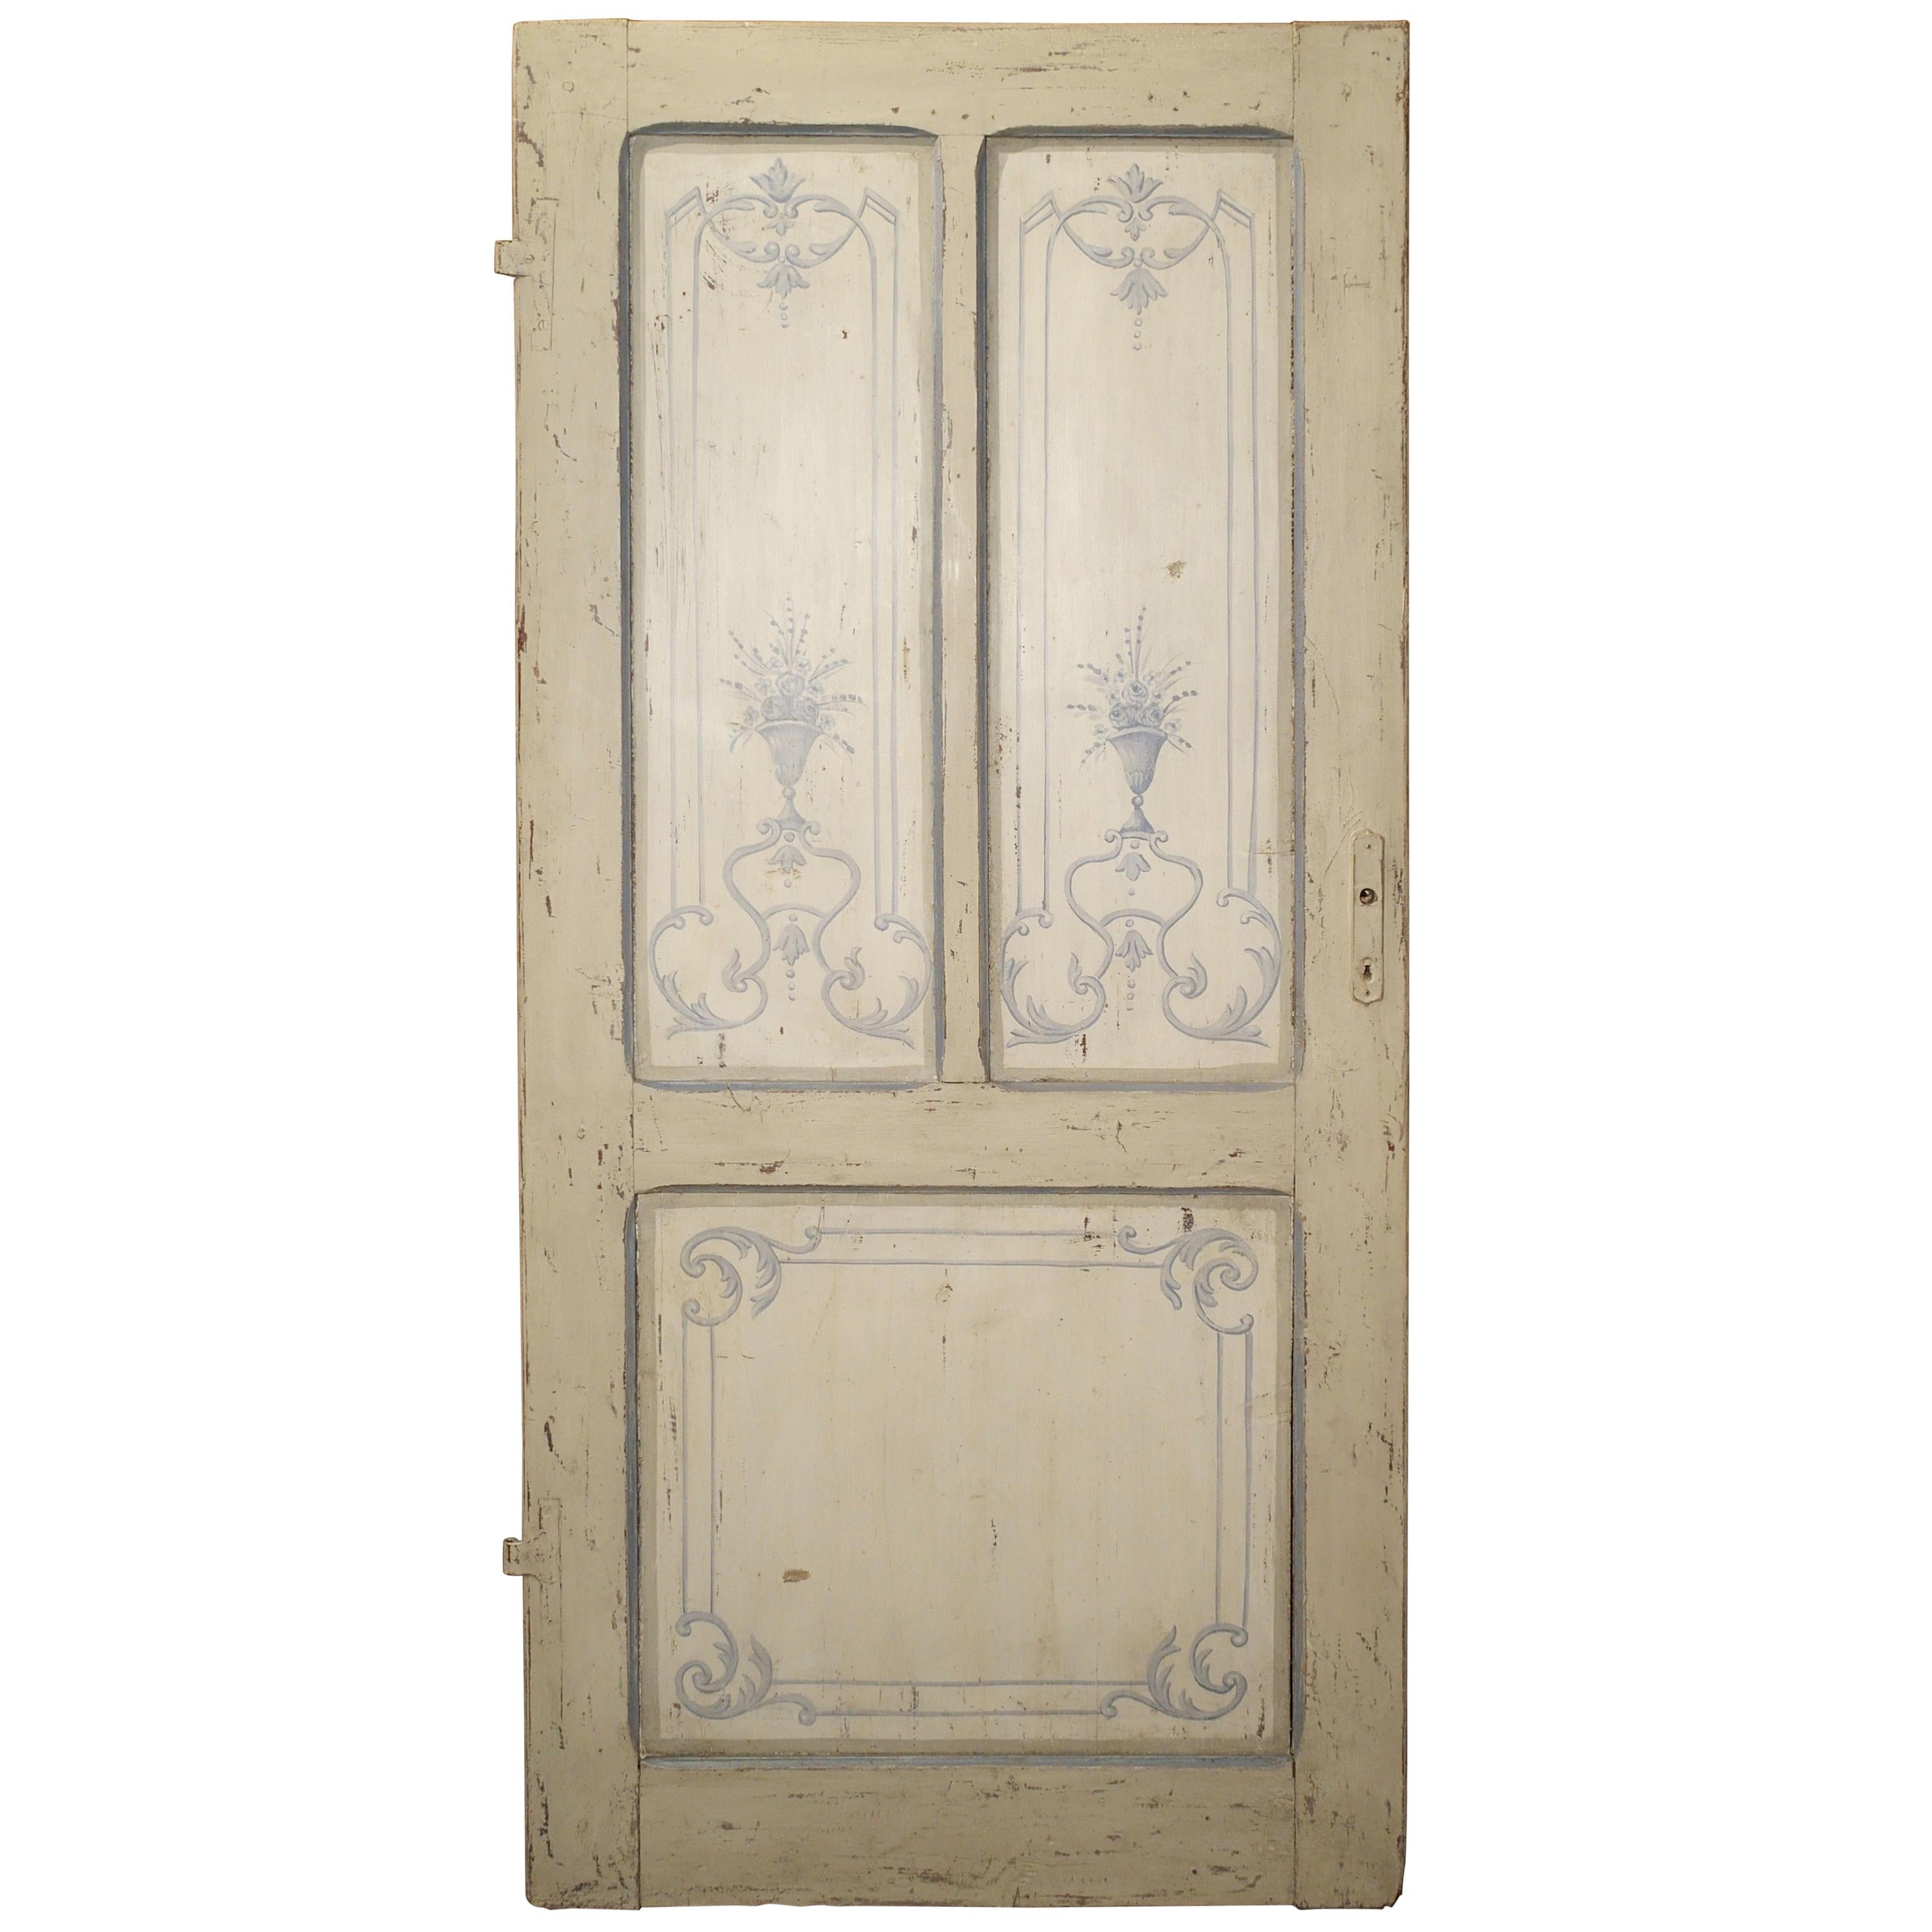 Blue and White Painted Antique Door from Lombardy, Italy circa 1850